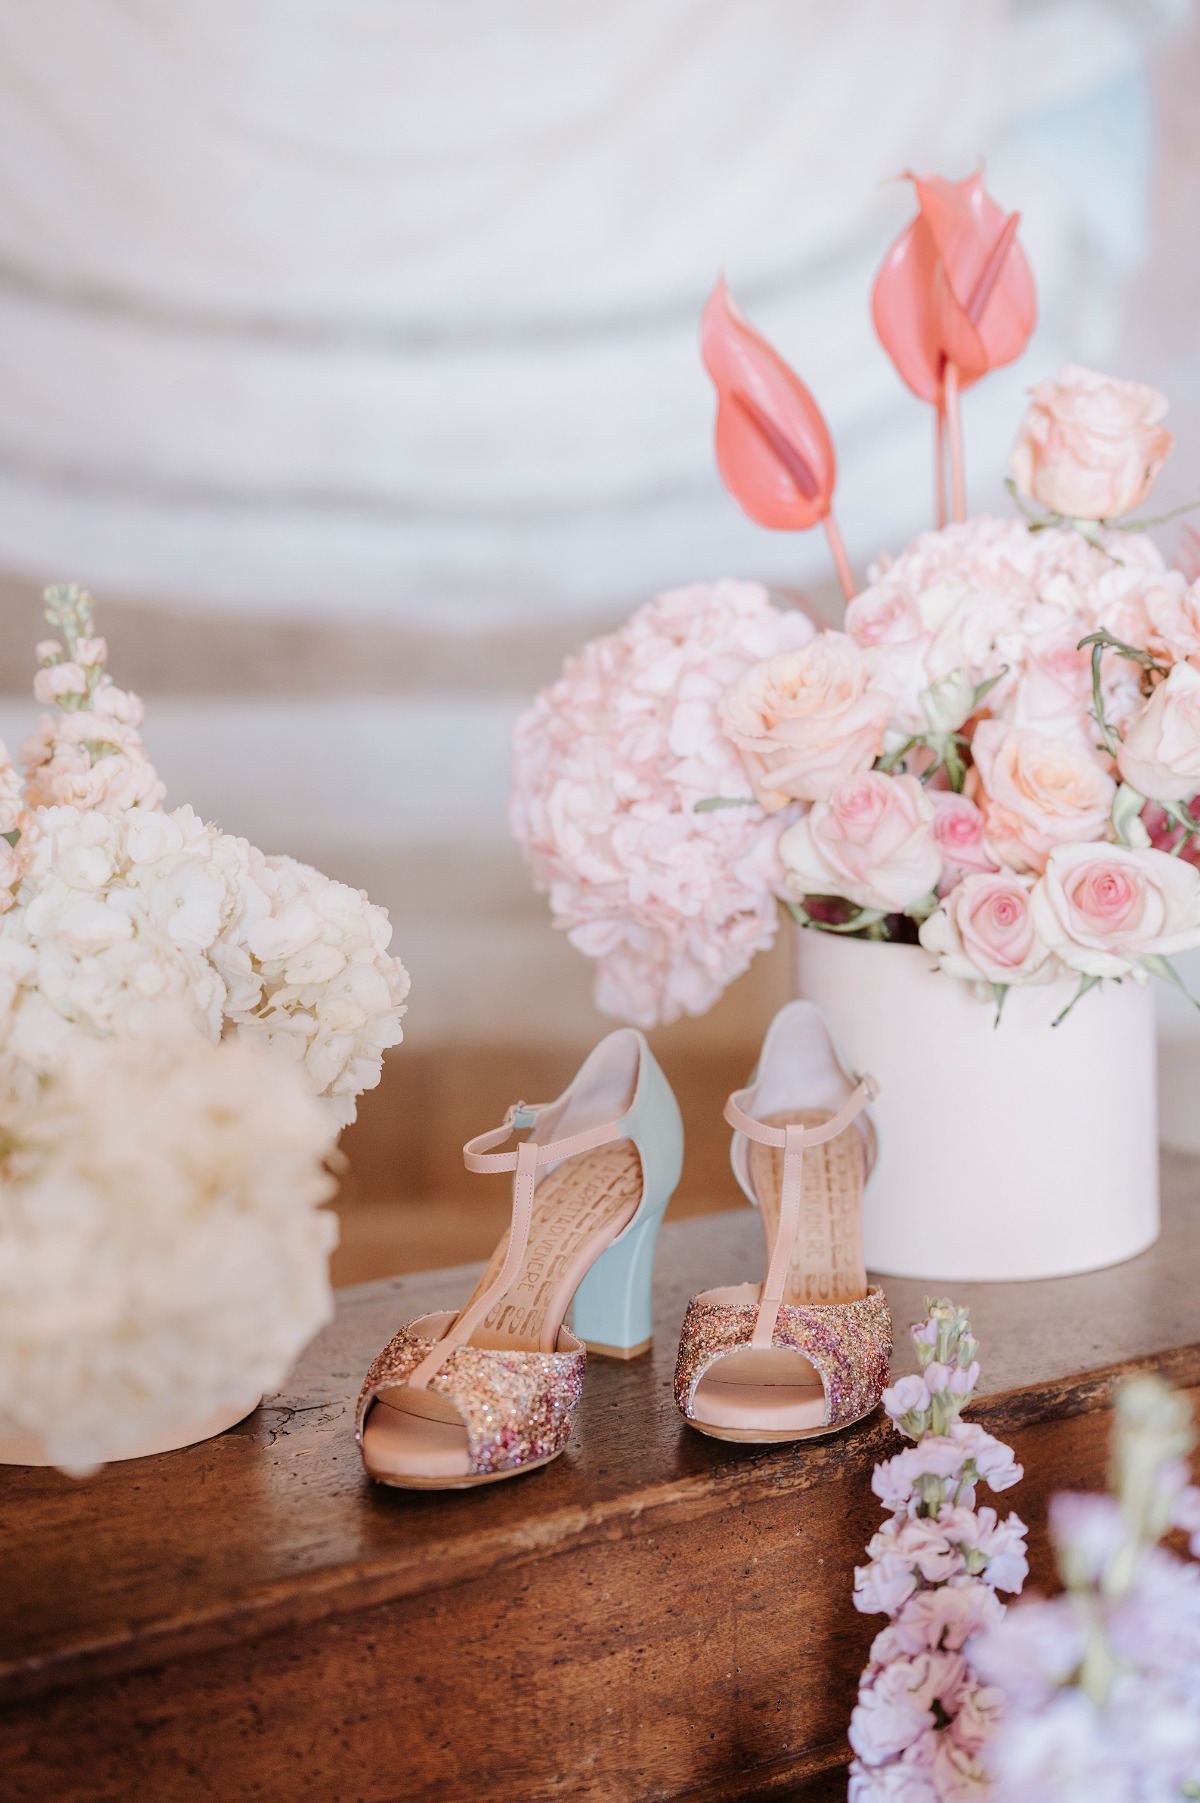 Sparkly wedding shoes and bridal bouquets